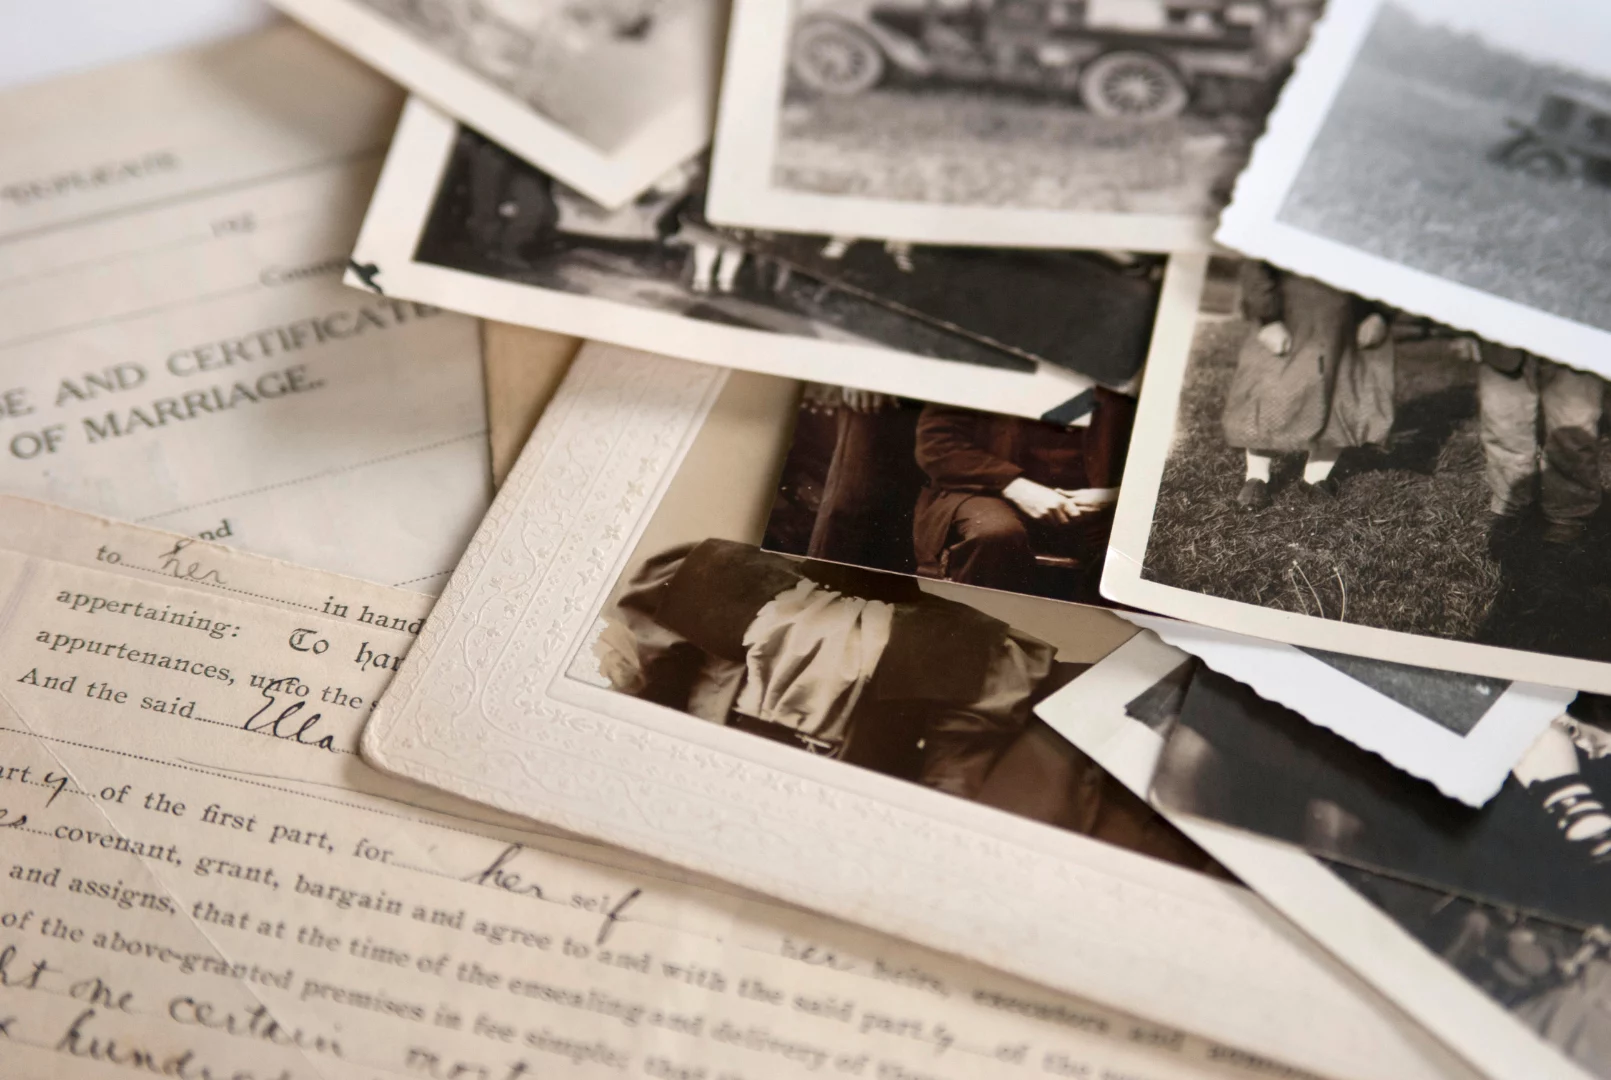 Antique photos and documents piled on top of each other.